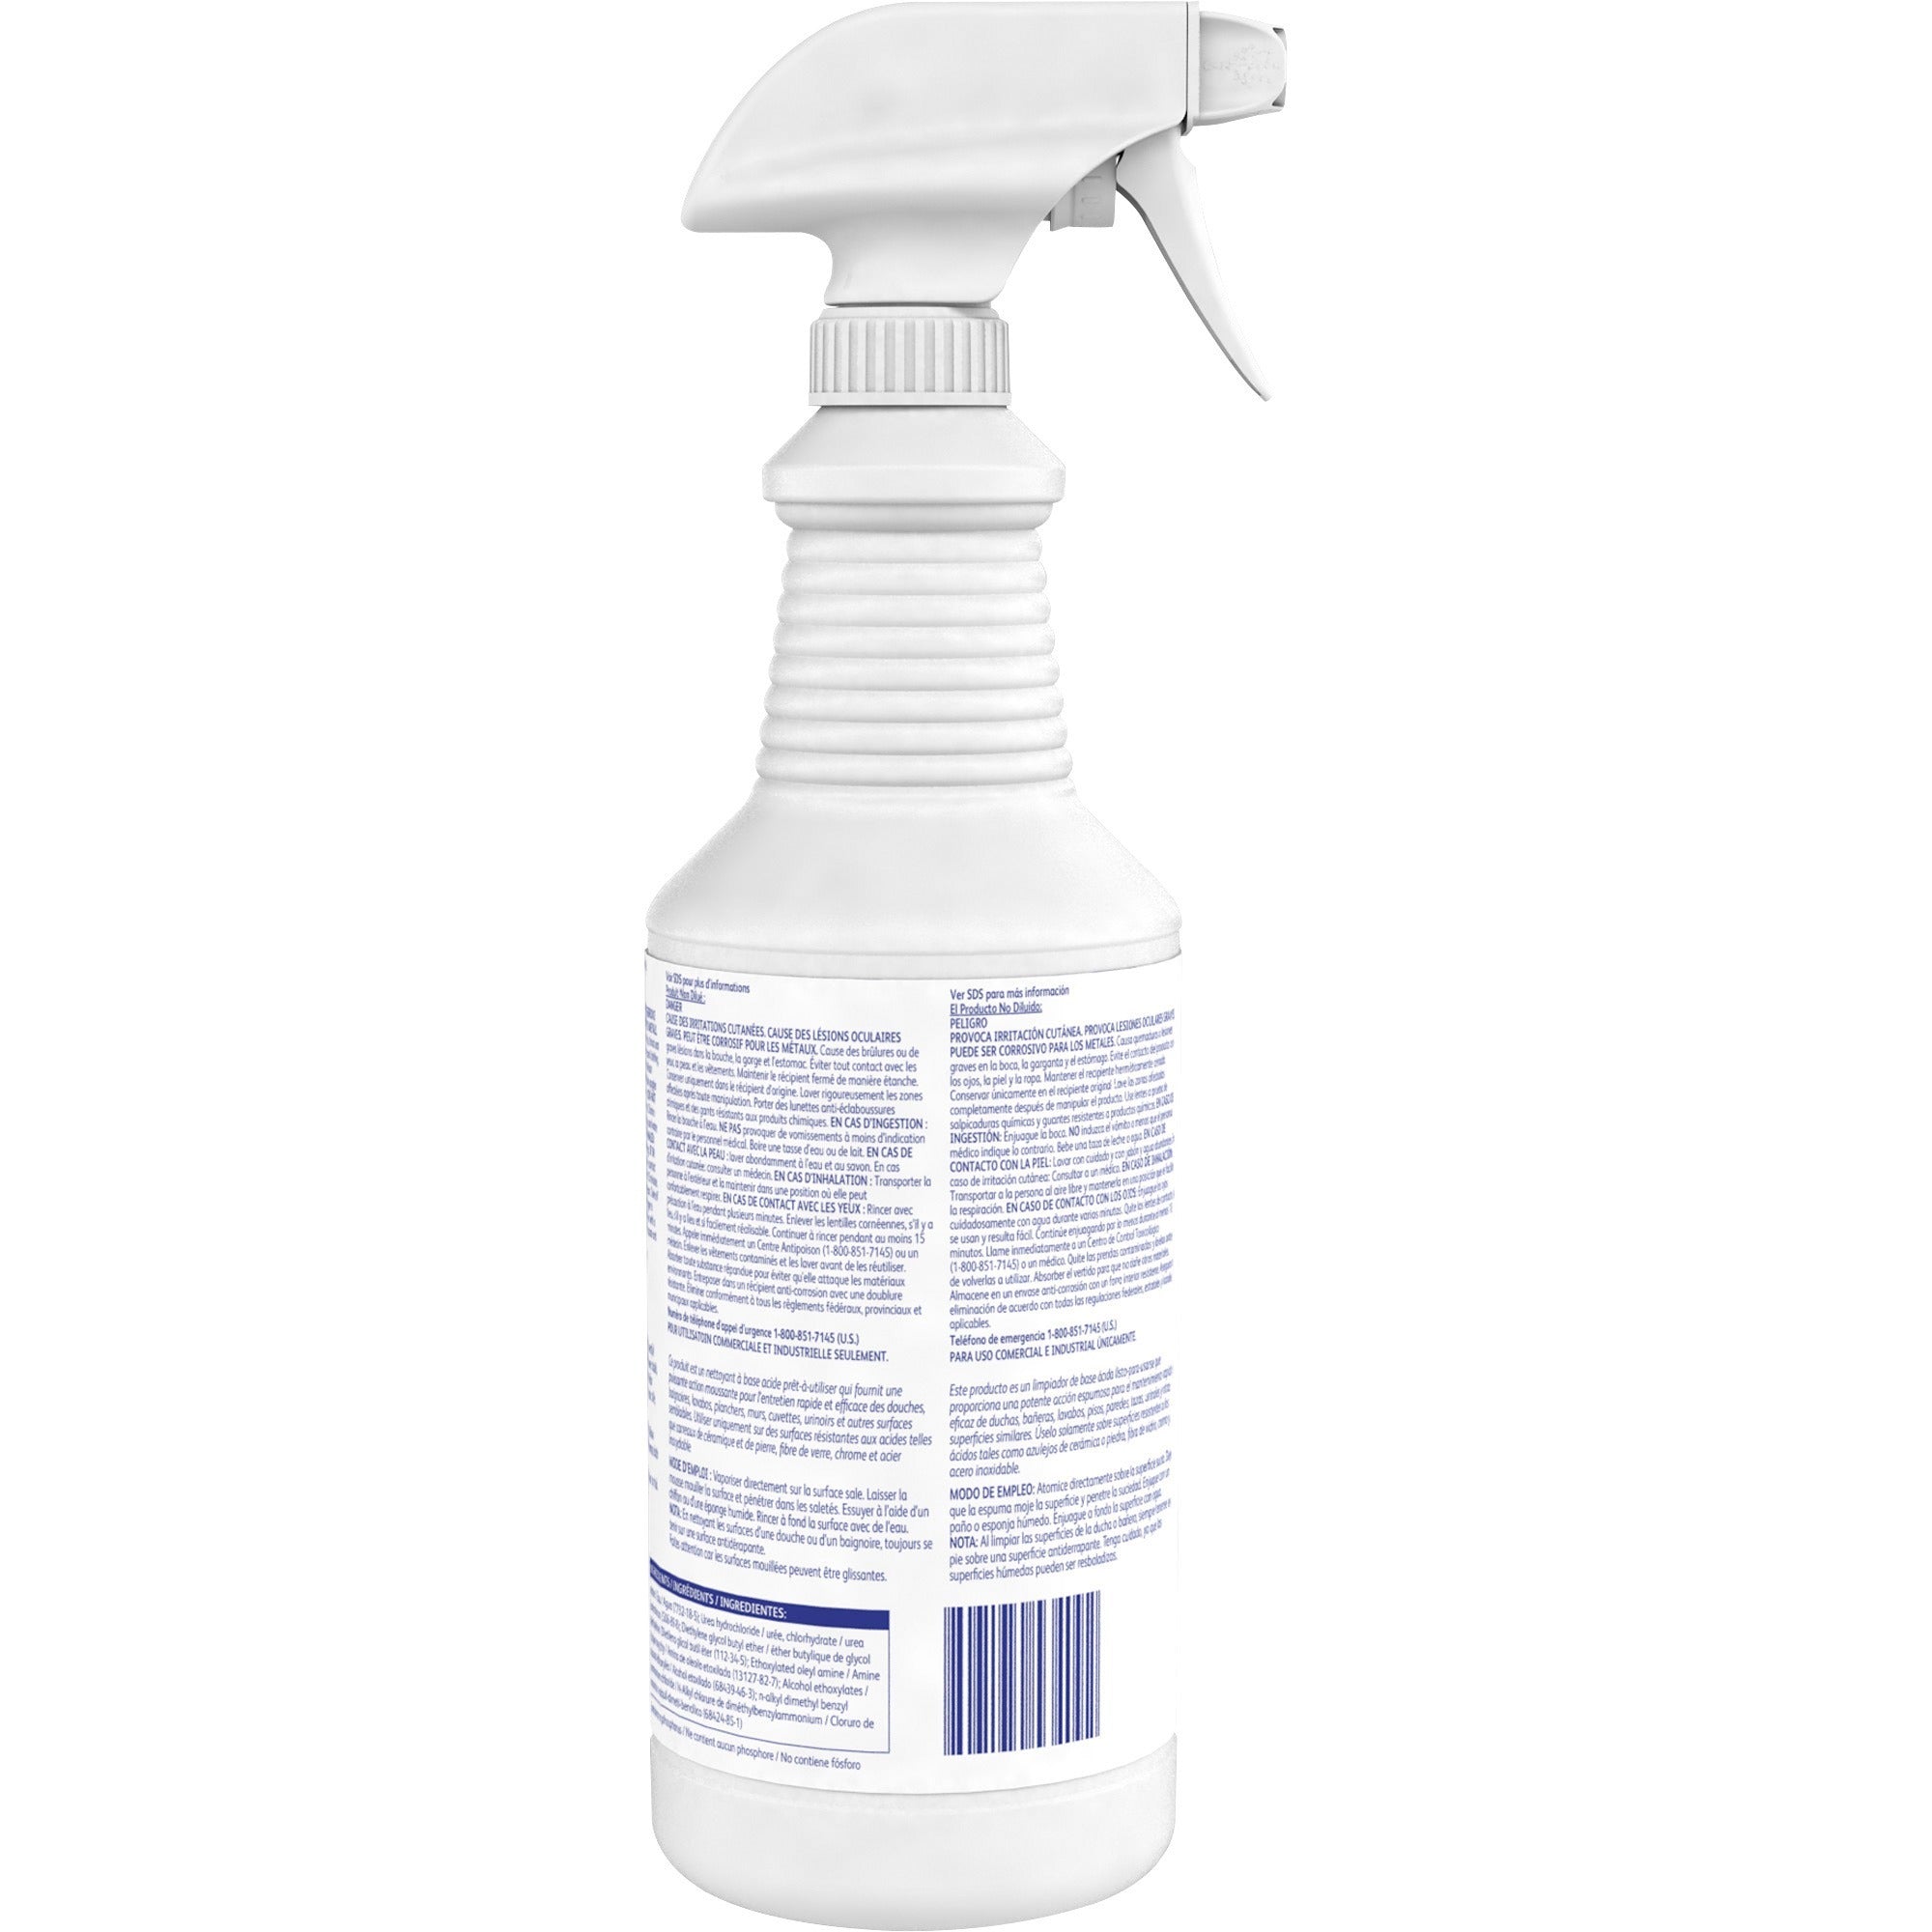 diversey-foaming-acid-restroom-cleaner-ready-to-use-32-fl-oz-1-quart-fresh-scent-12-carton-strong-red_dvo95325322ct - 2